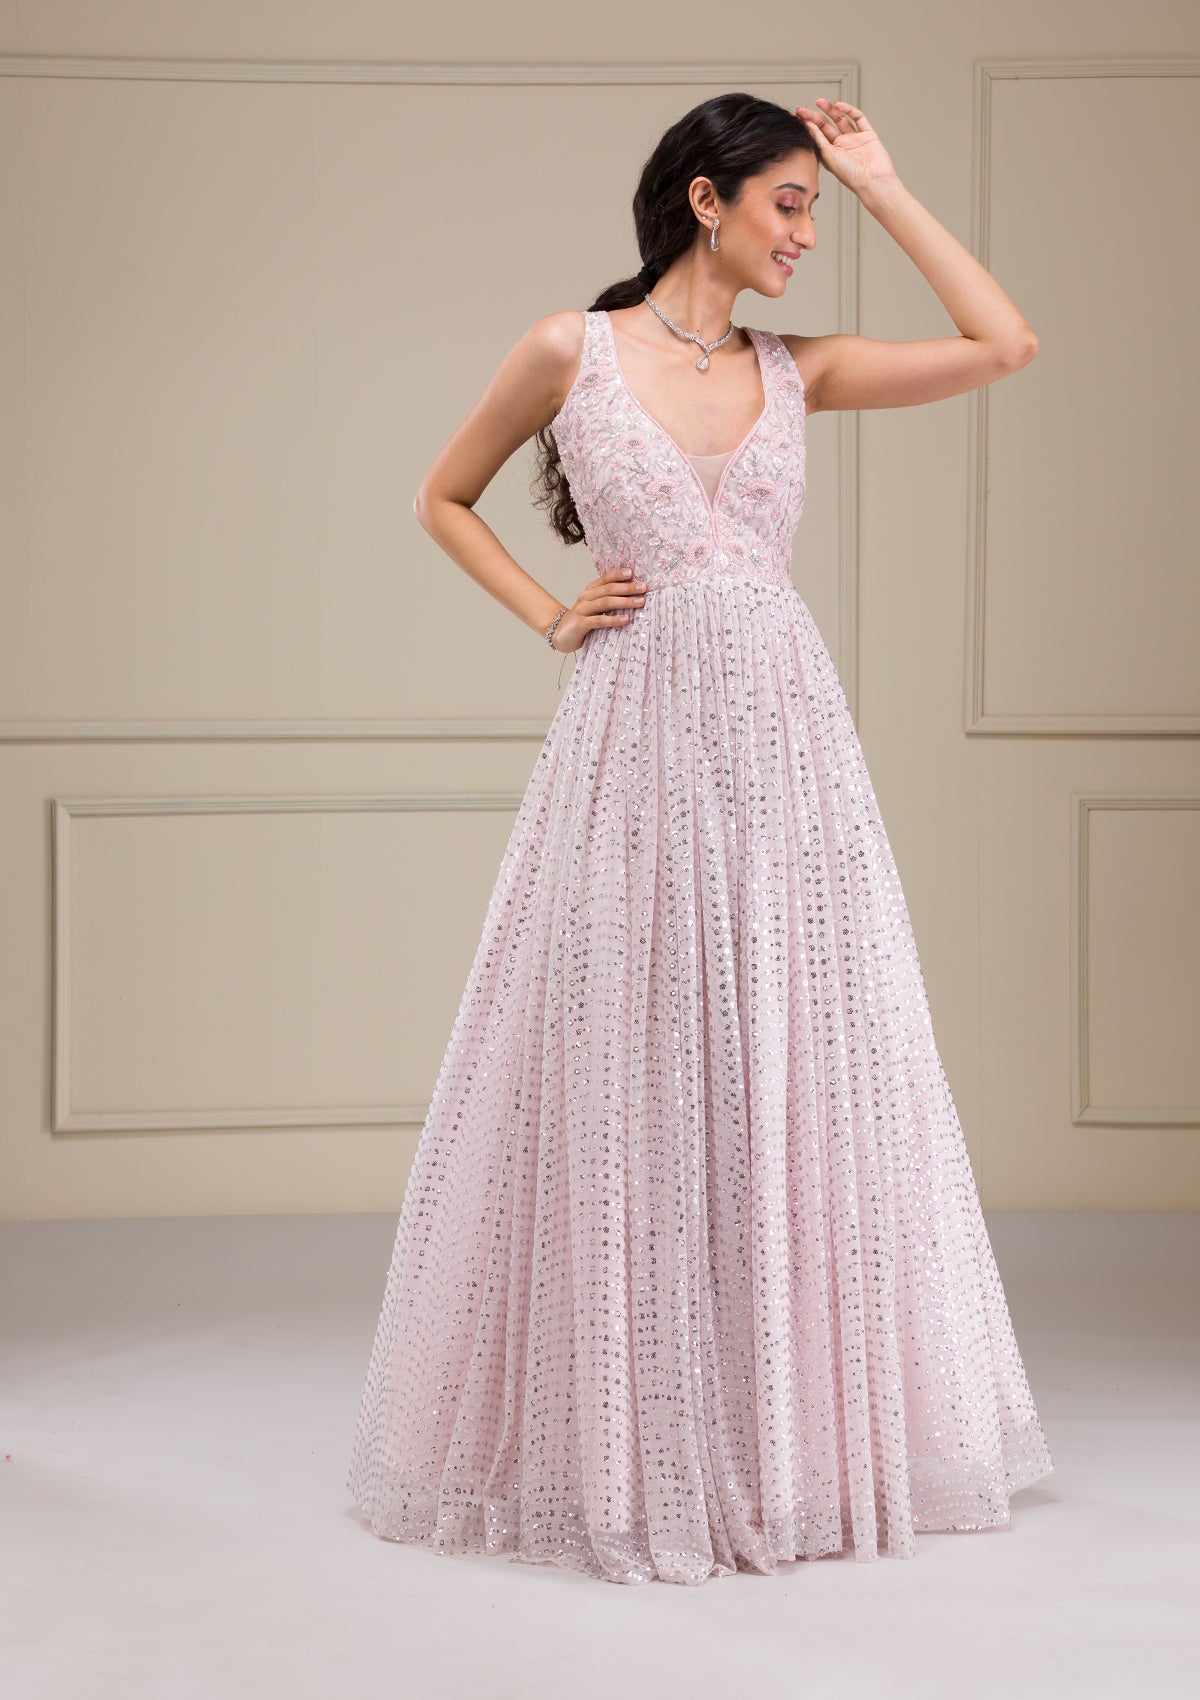 Baby Pink Cutdana Net Gown